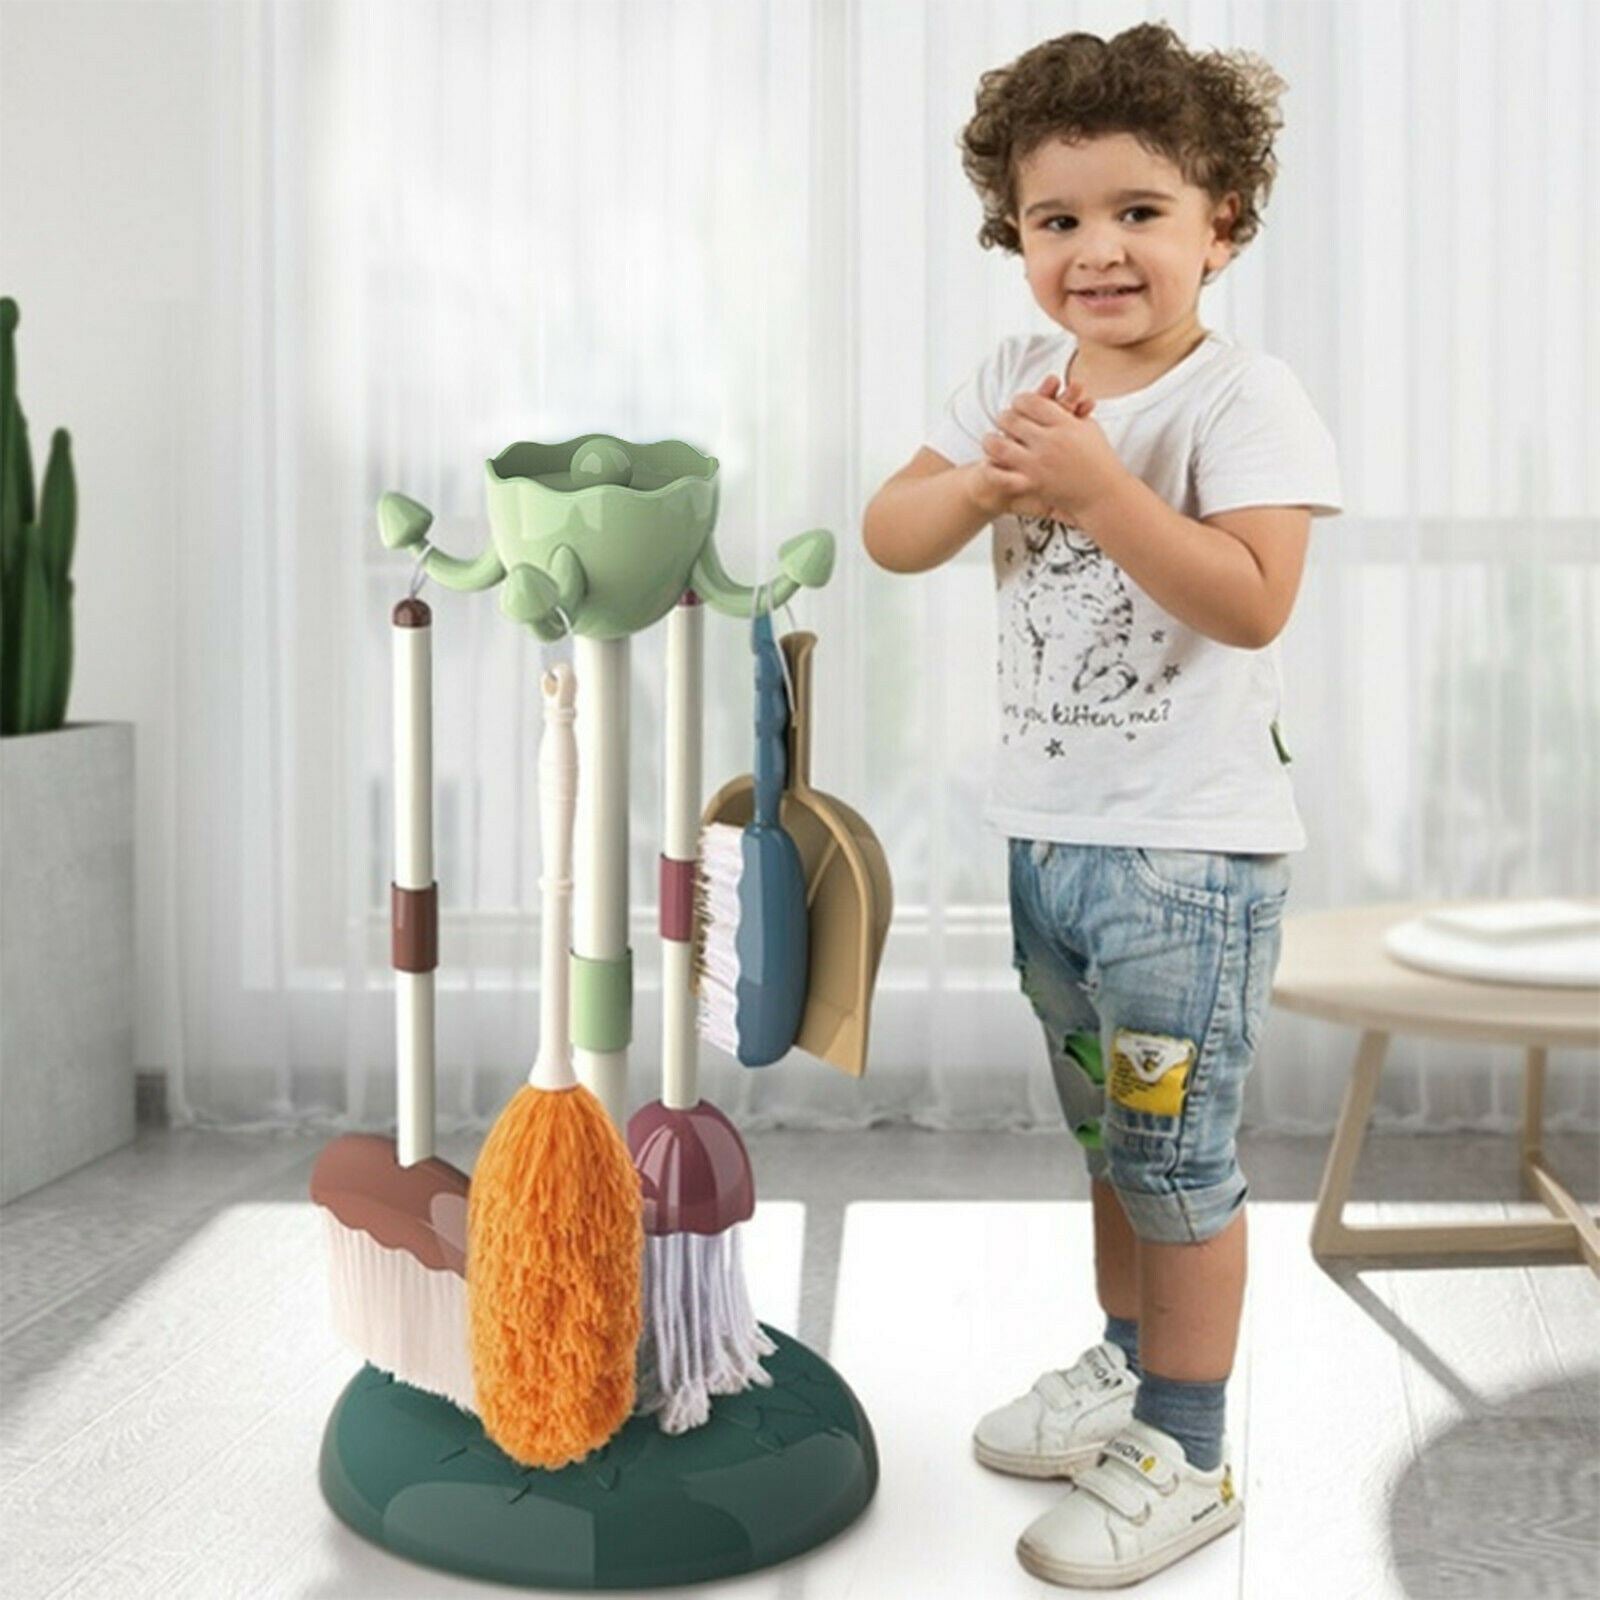 Little Dustman 5 Piece Cleaning Play Set by The Magic Toy Shop - UKBuyZone